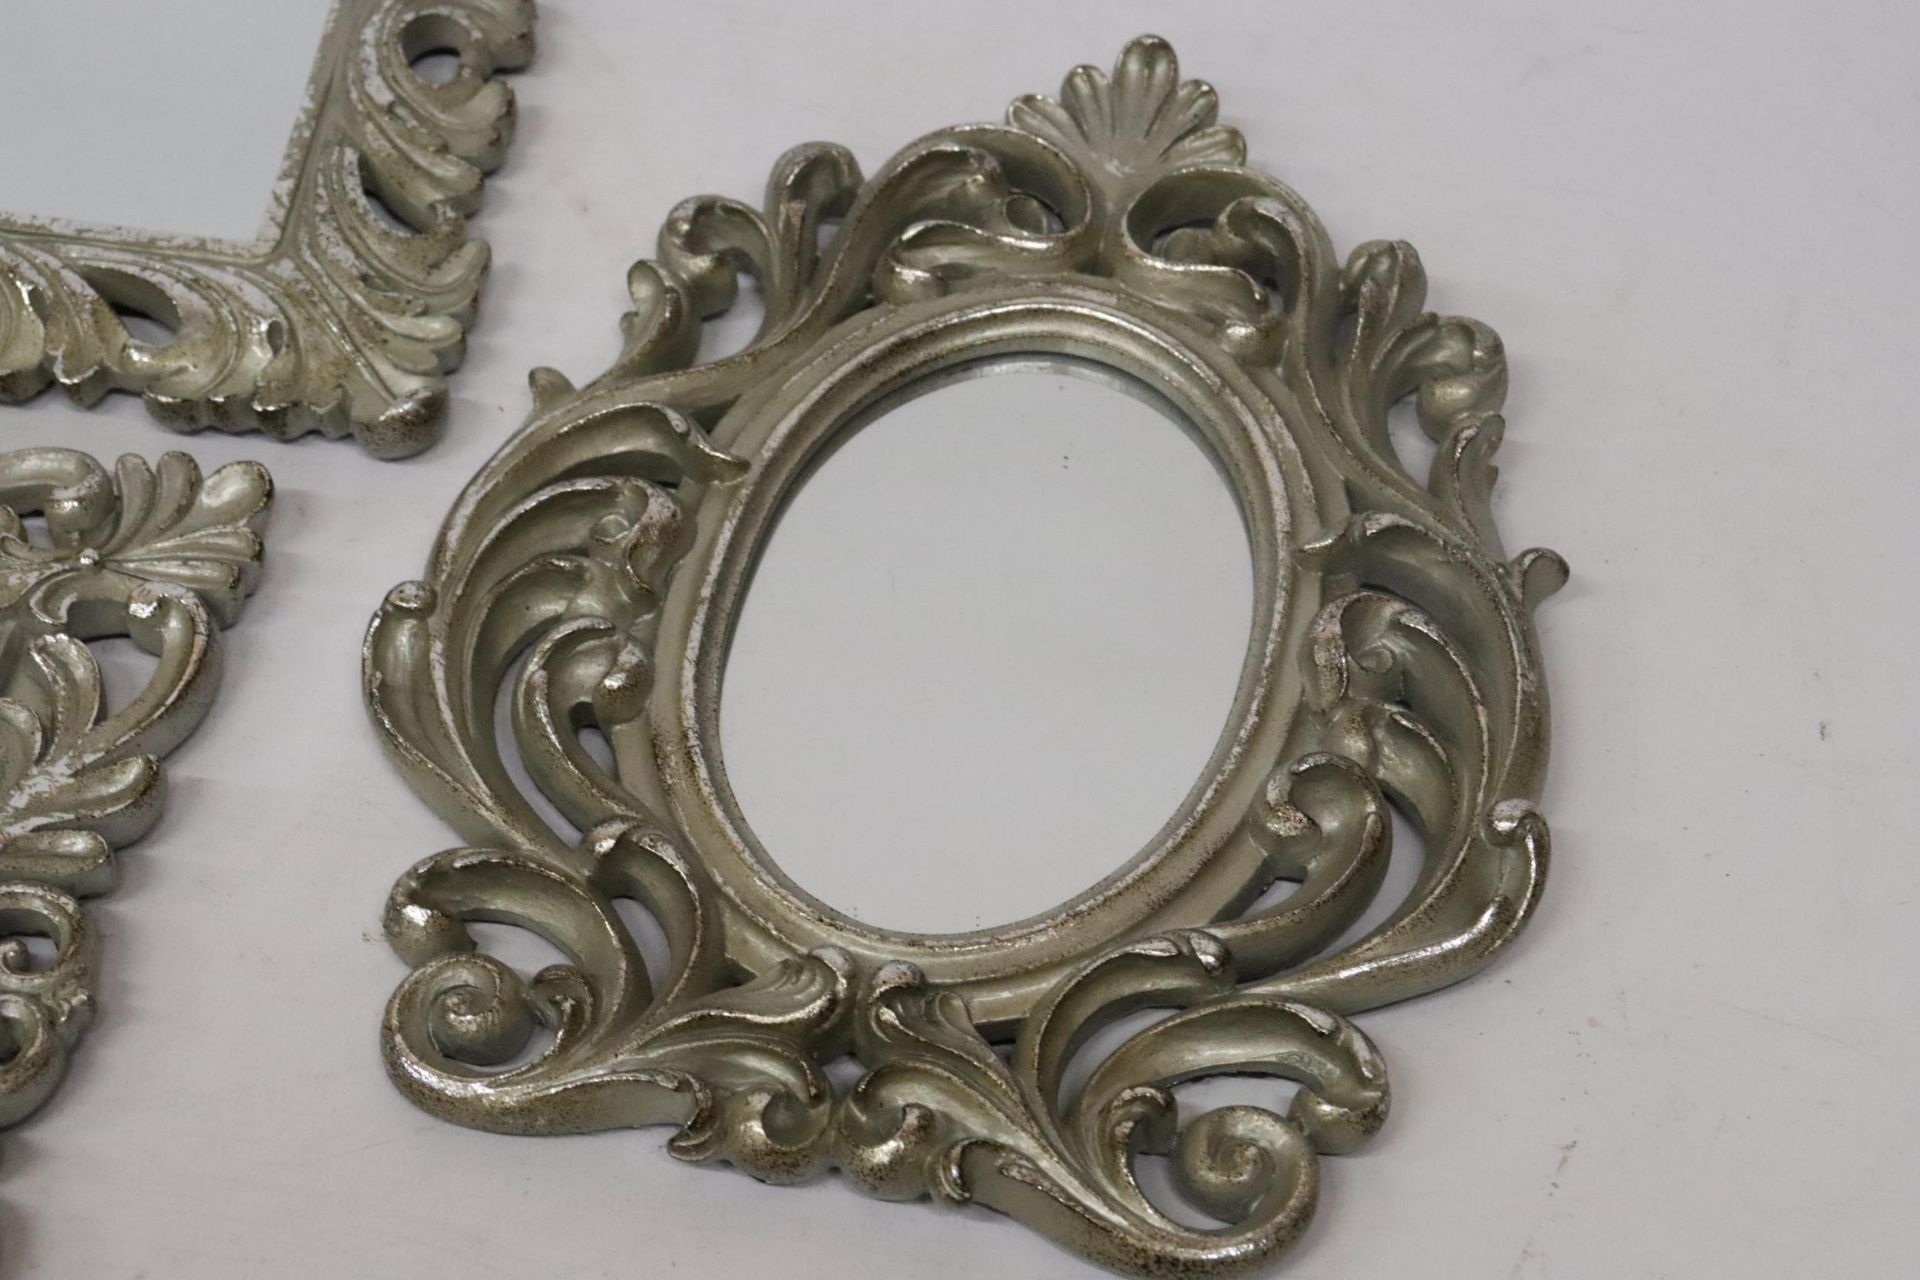 FIVE SMALL MIRRORS WITH ORNATE SILVER COLOURED FRAMES - Image 4 of 9